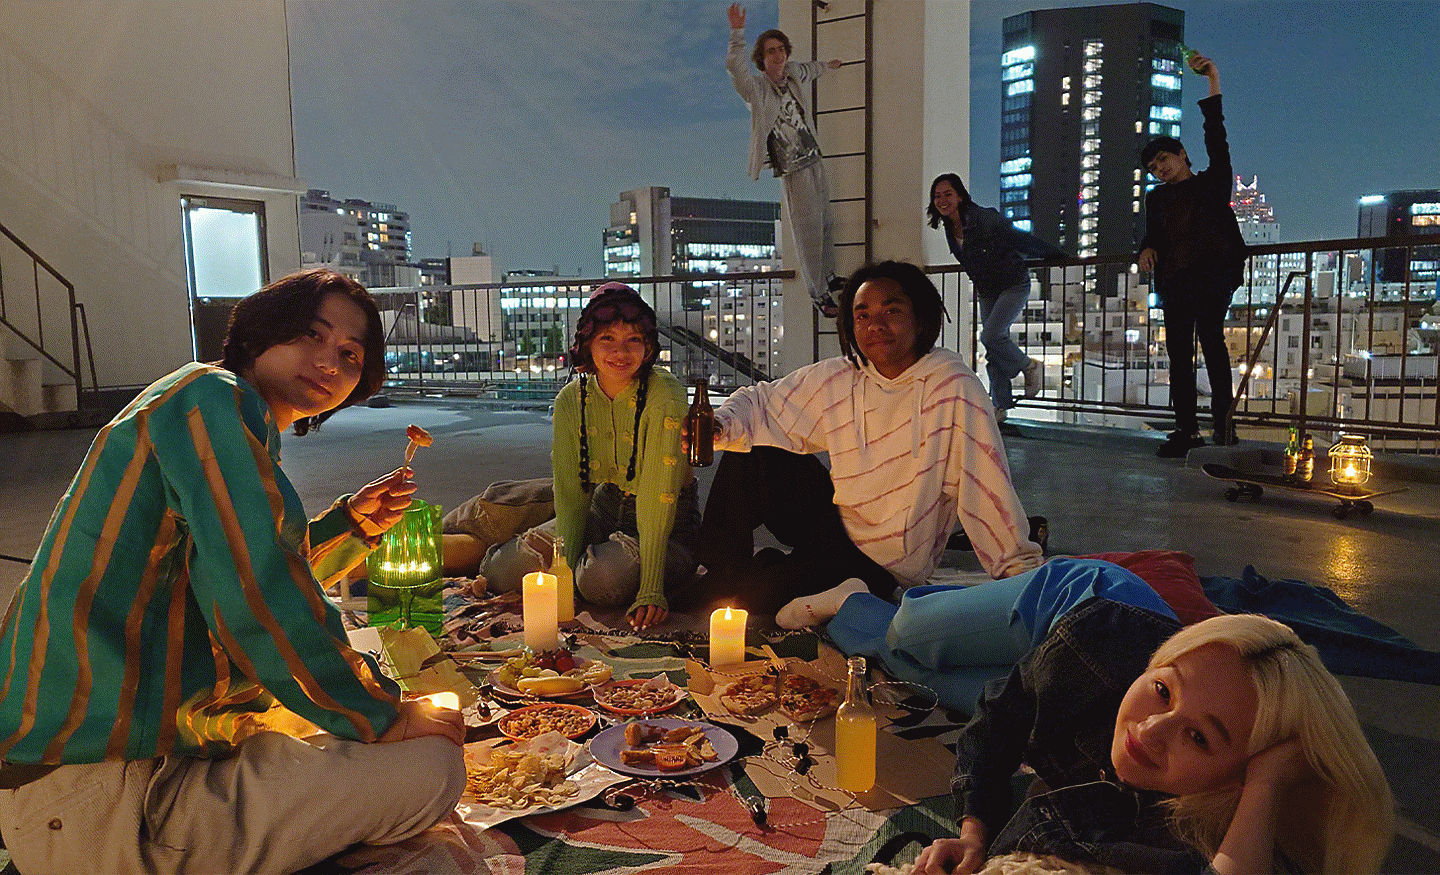 Image of a group of people having a picnic on a city rooftop at night